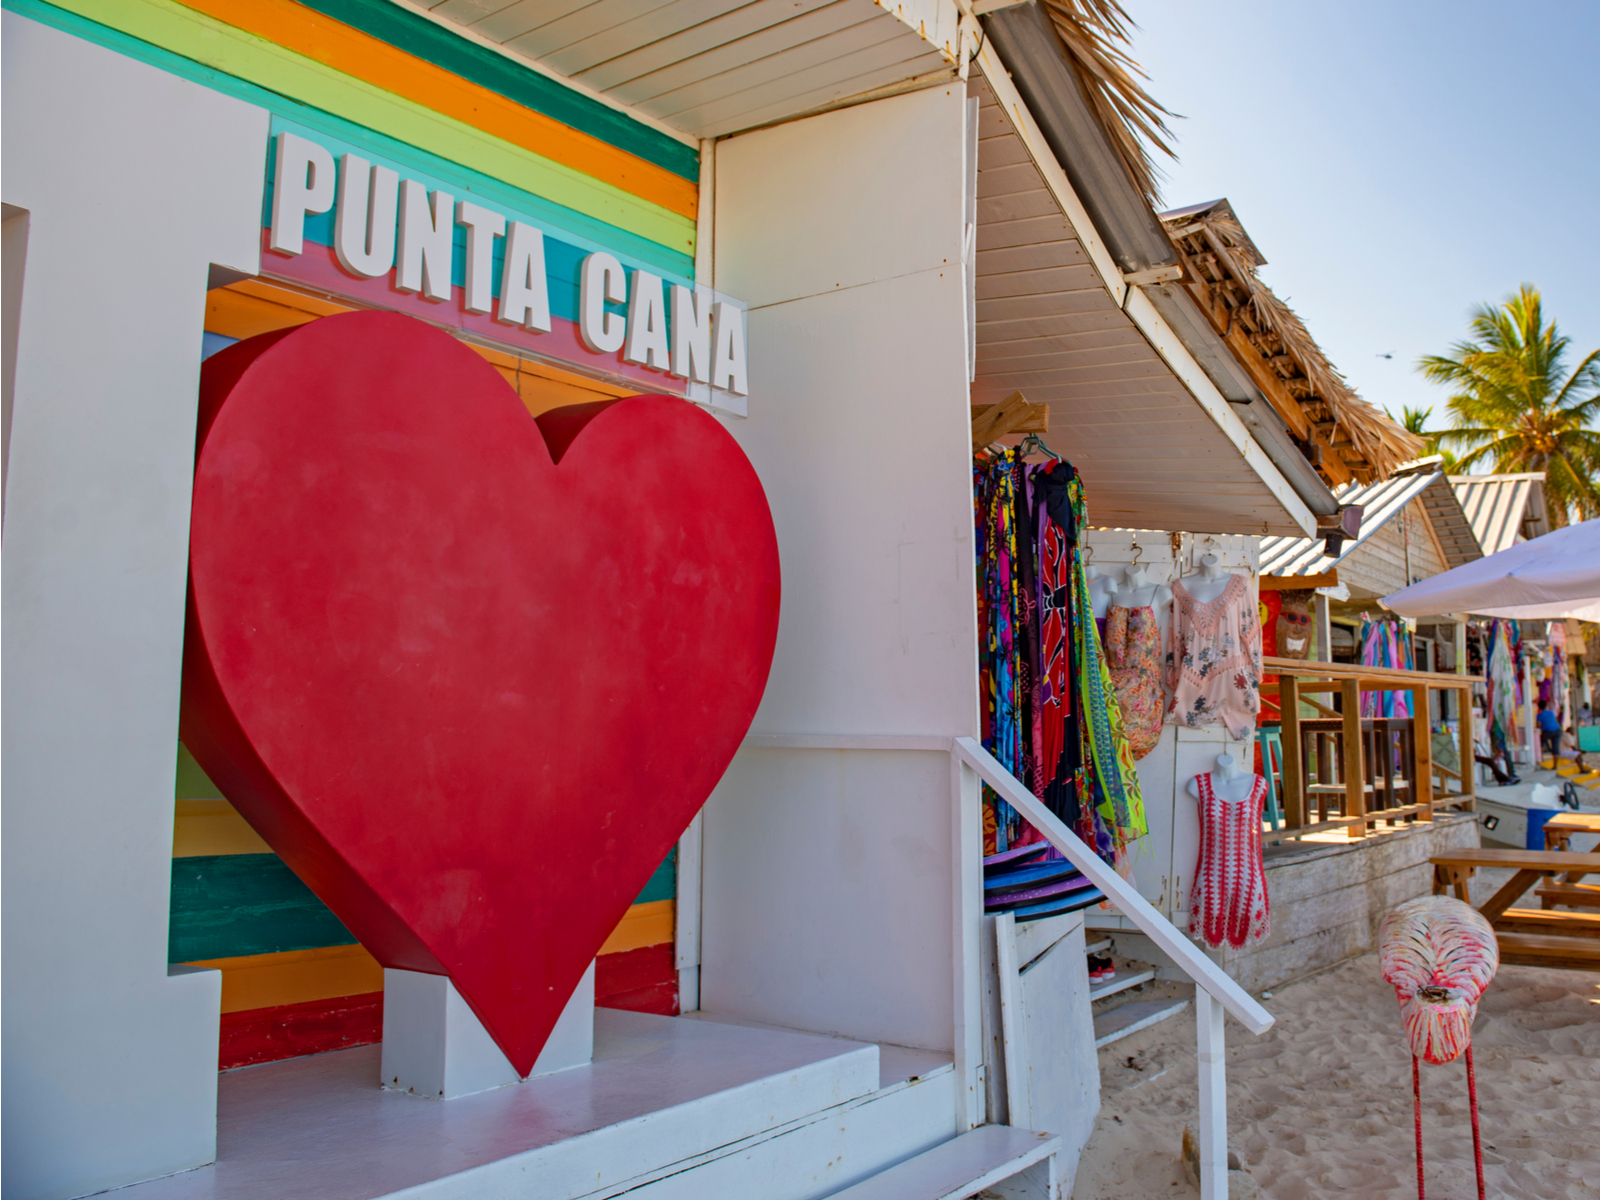 Gift shop with a rainbow exterior and a big red heart sculpture for a piece on the best time to visit Punta Cana